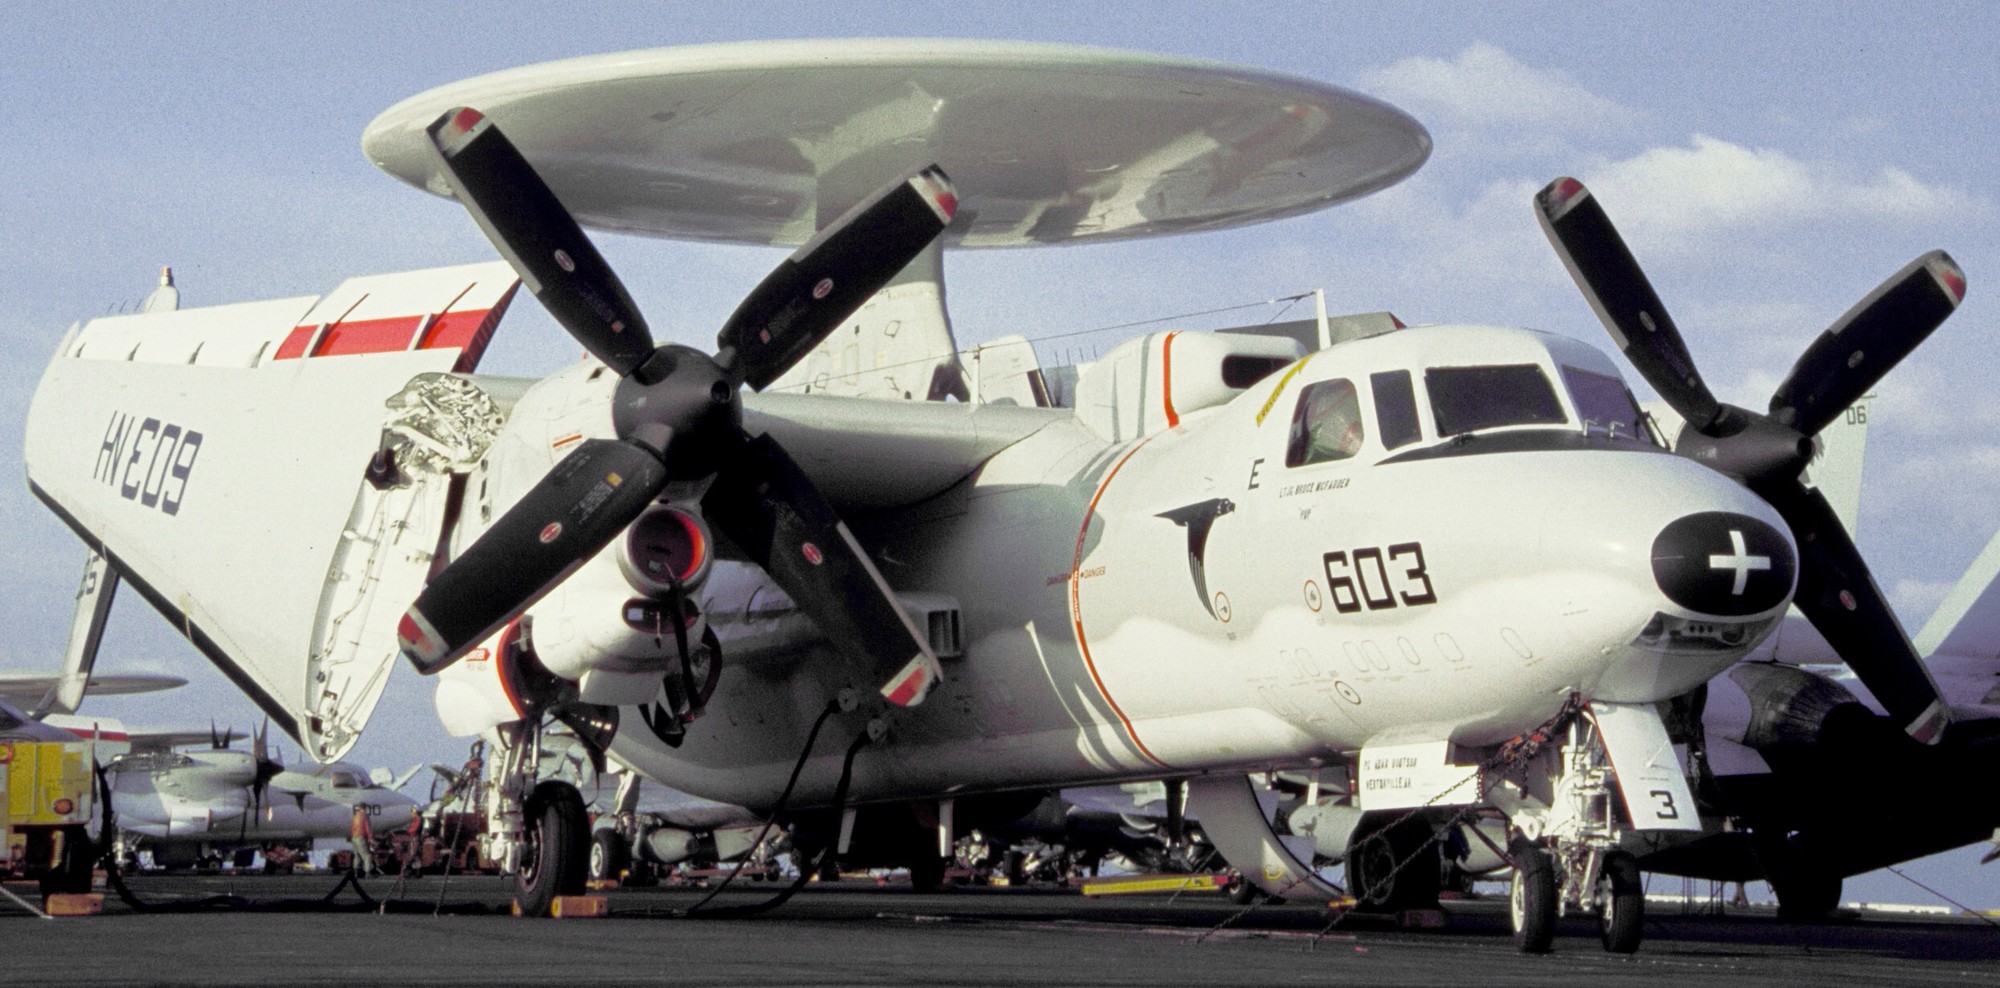 vaw-117 wallbangers carrier airborne early warning squadron navy e-2c hawkeye cvw-11 uss abraham lincoln cvn-72 82